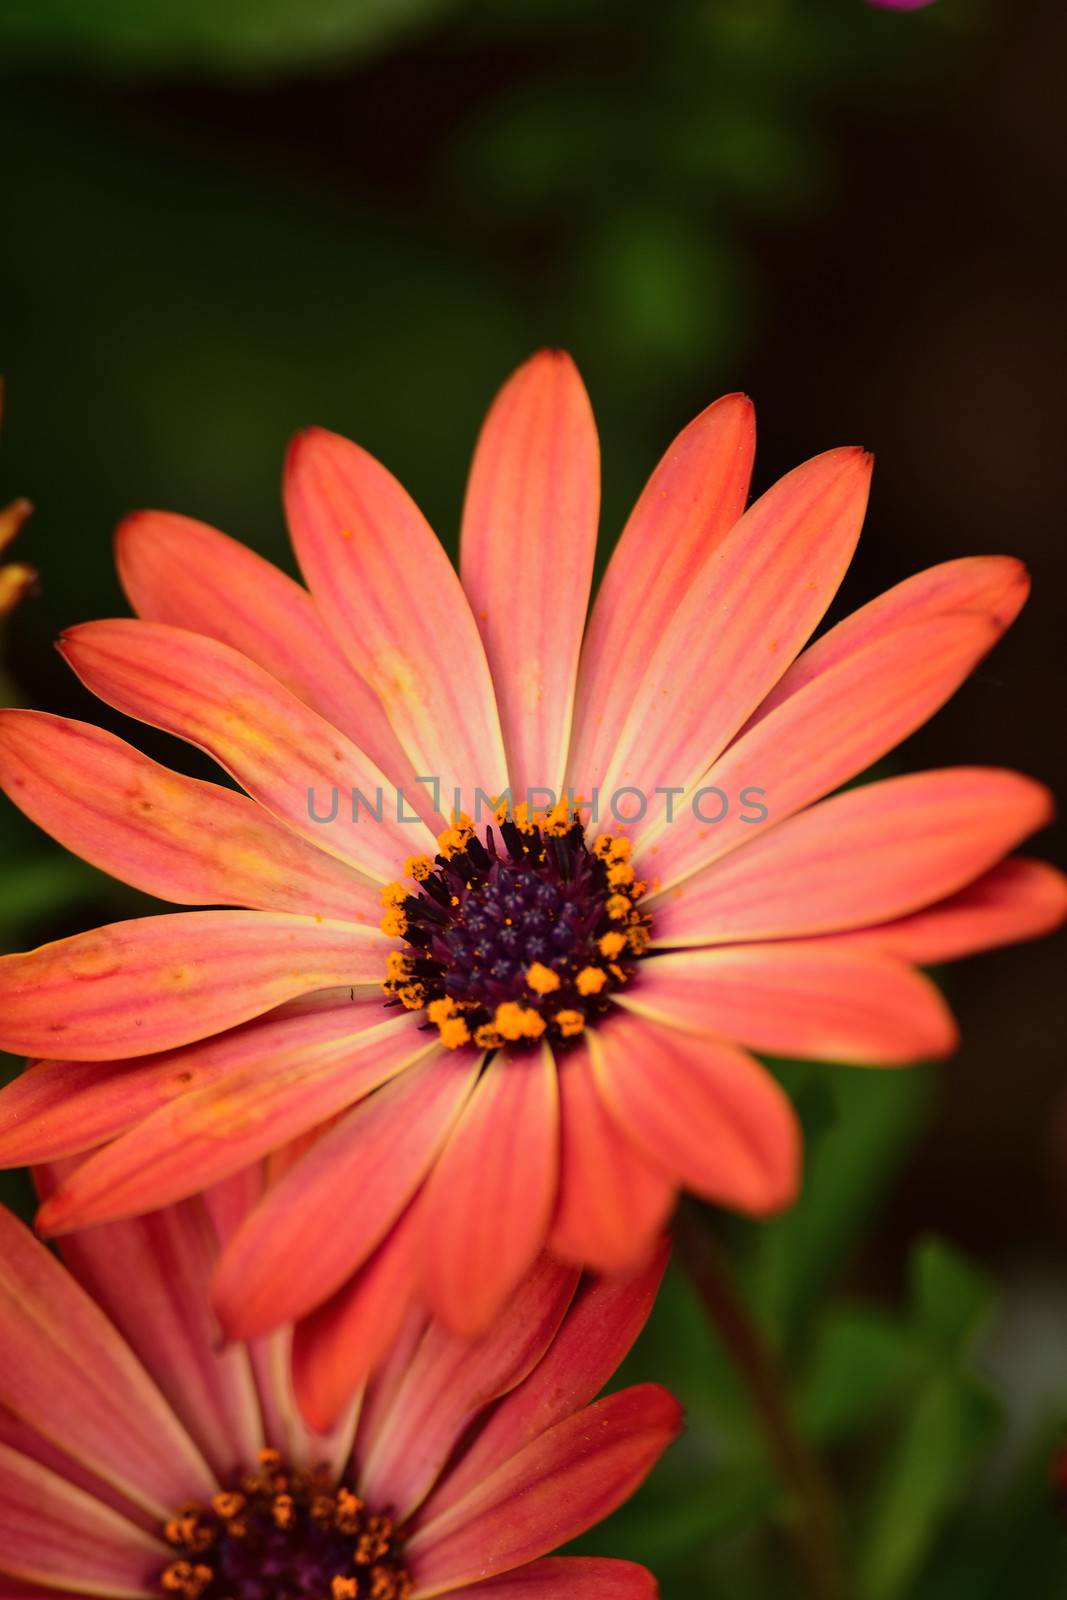 Macro details of pink colored Daisy flowers by shubhashish